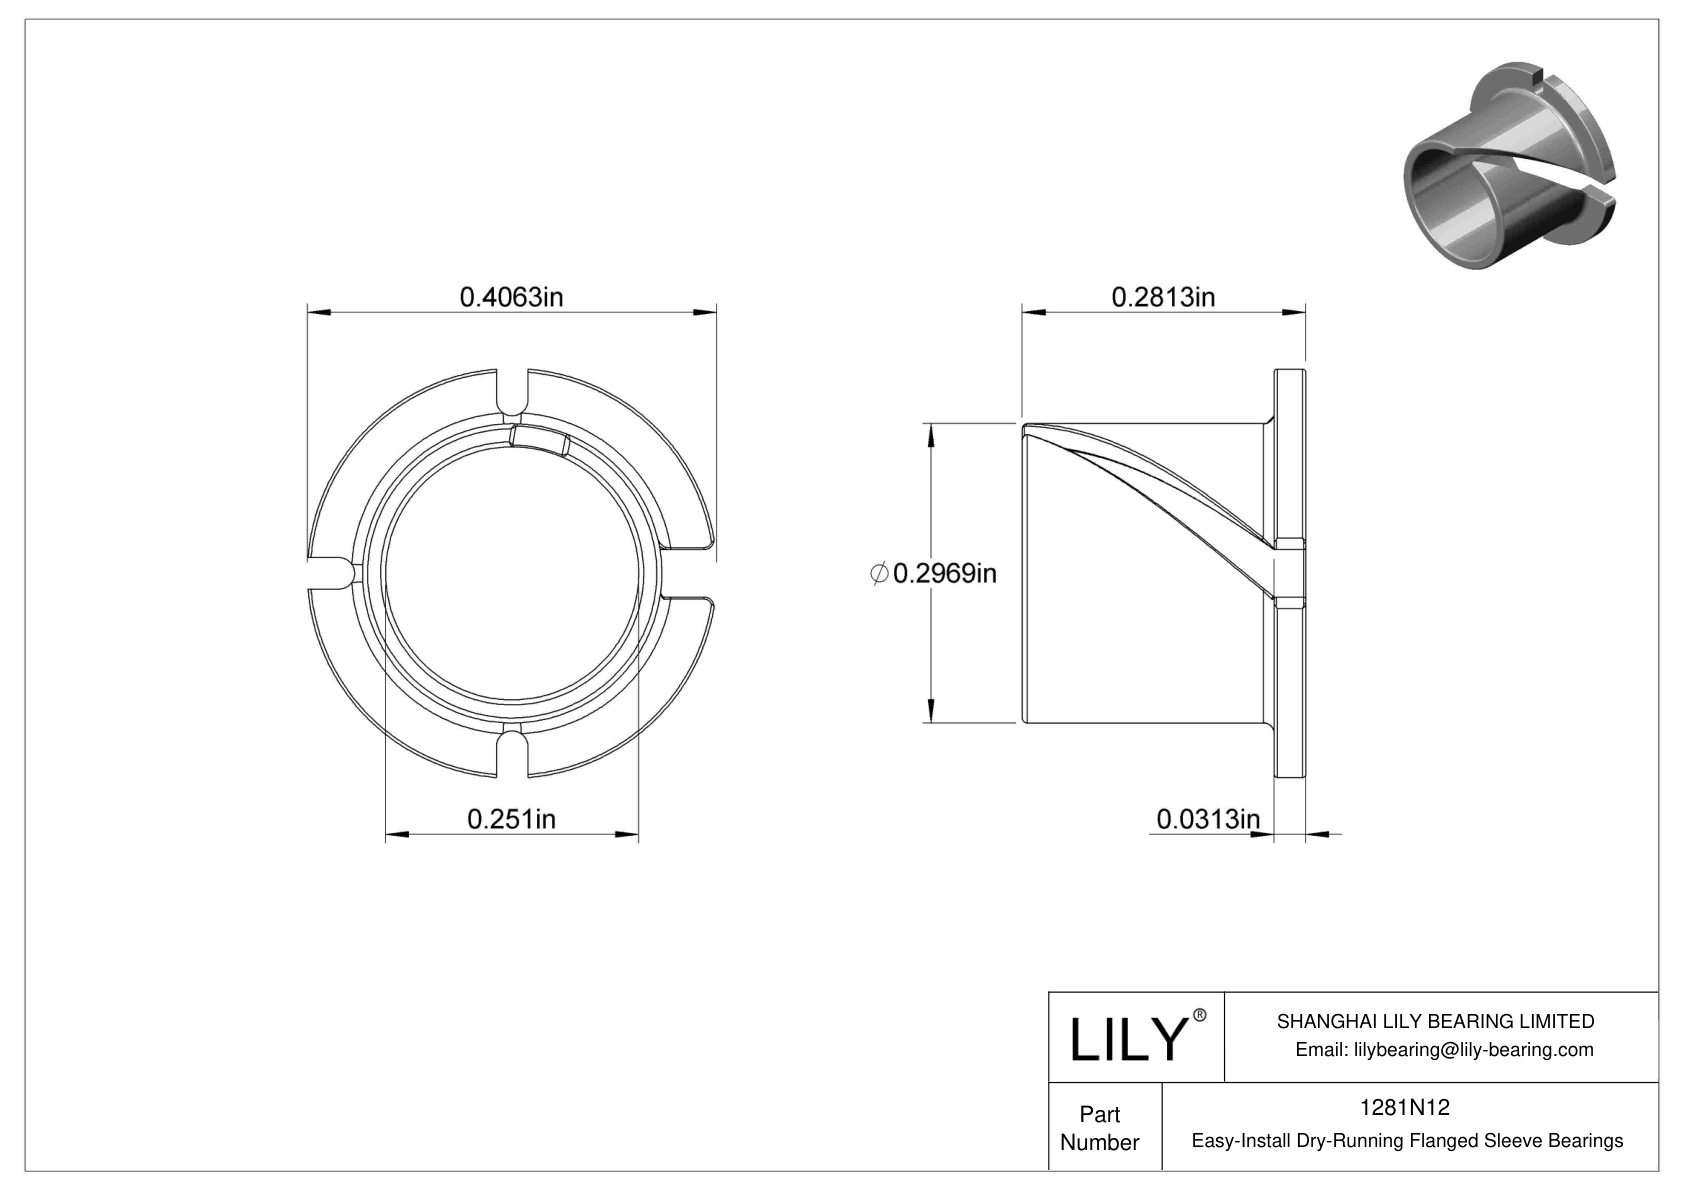 BCIBNBC Easy-Install Dry-Running Flanged Sleeve Bearings cad drawing